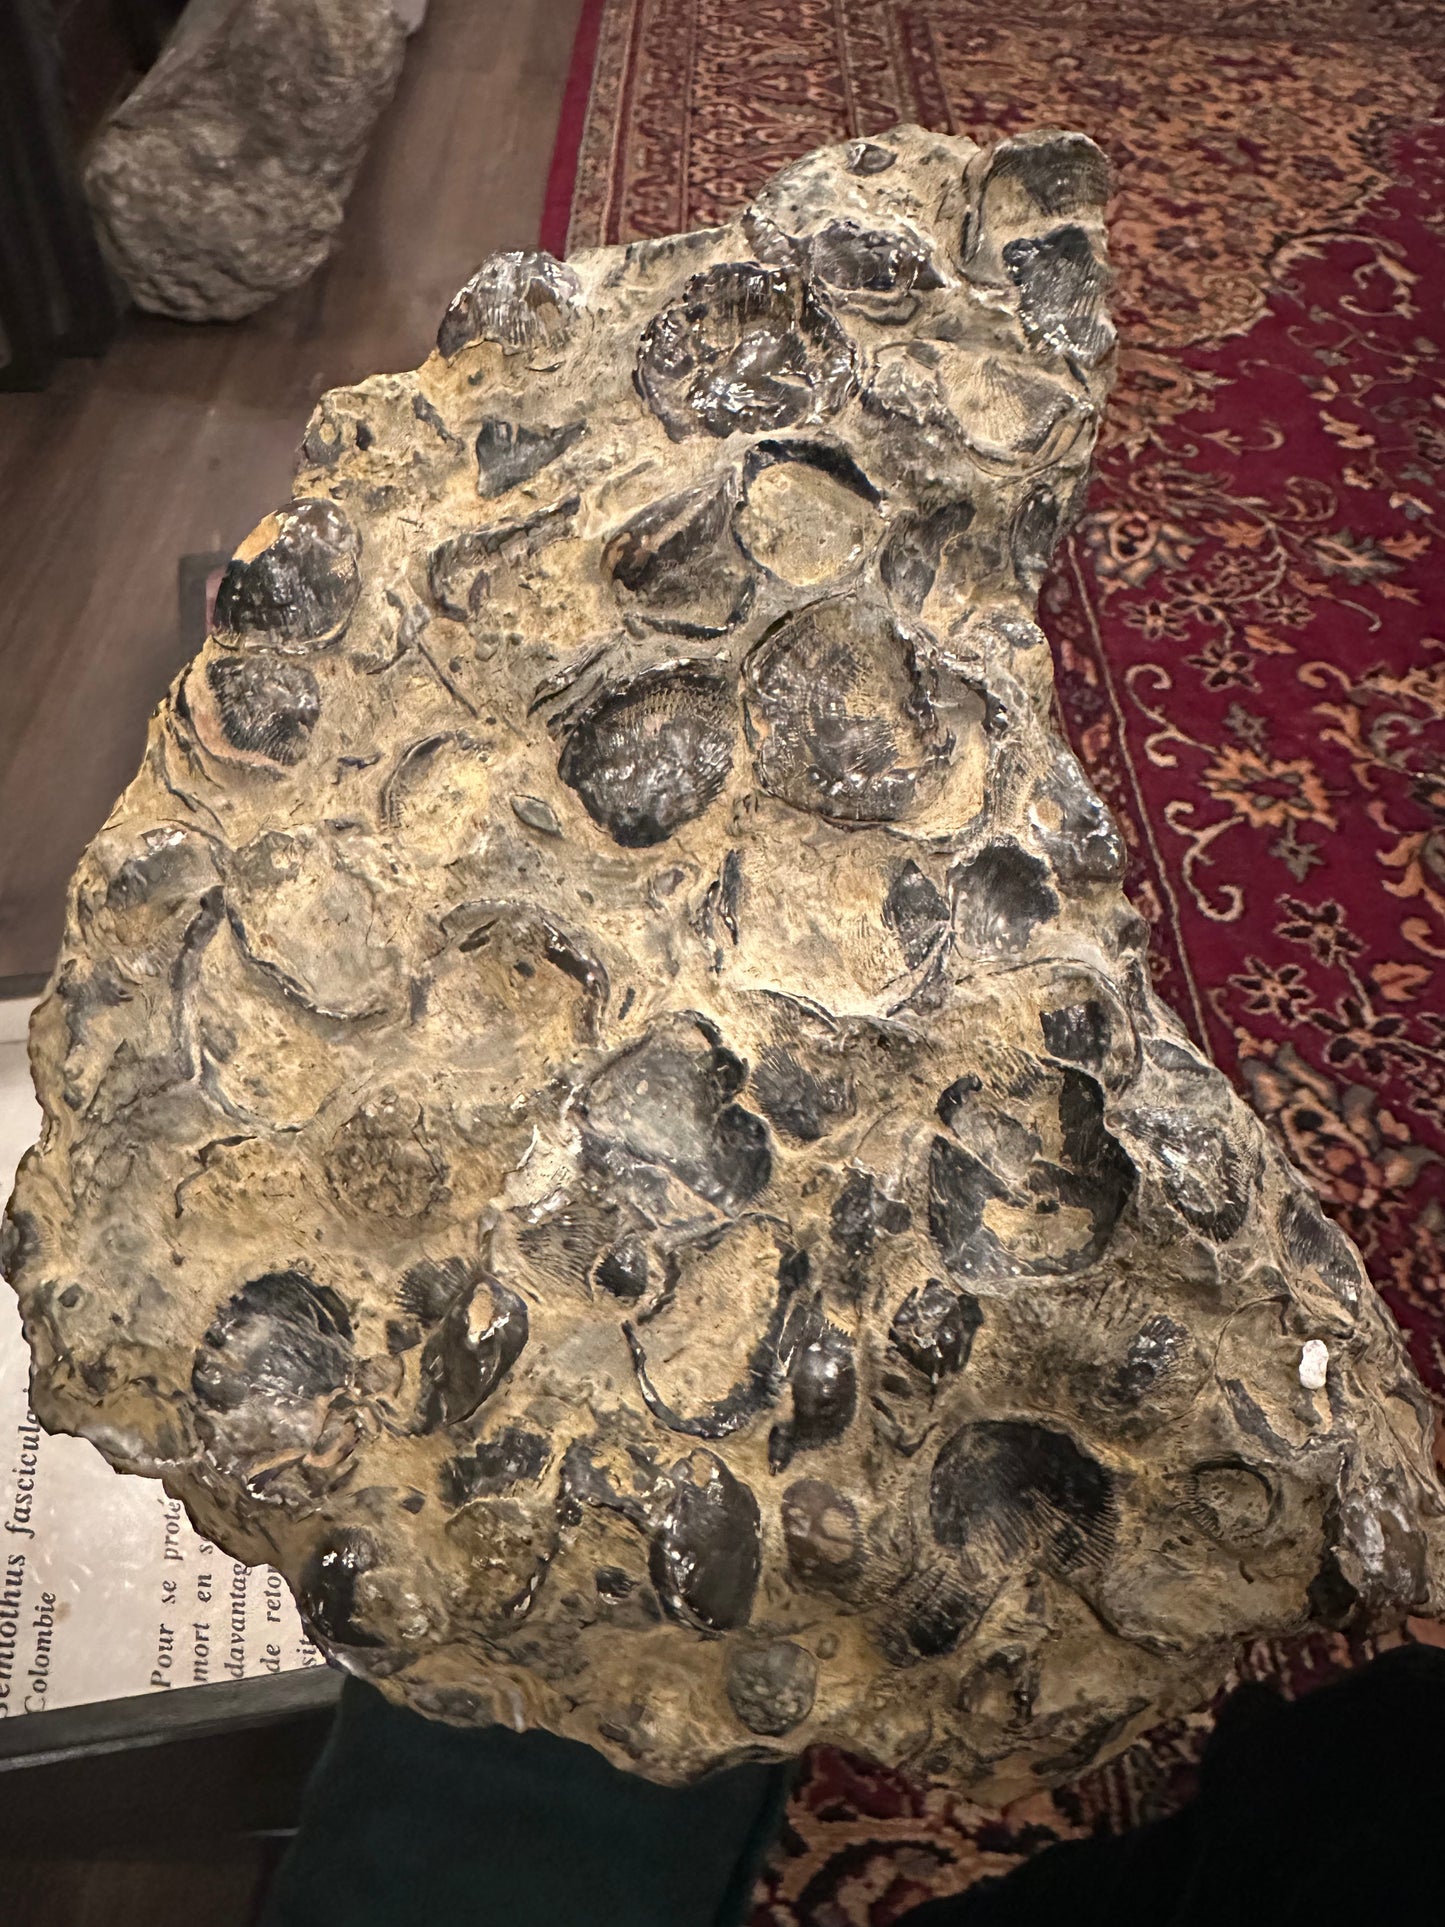 Large brachiopode plate fossil